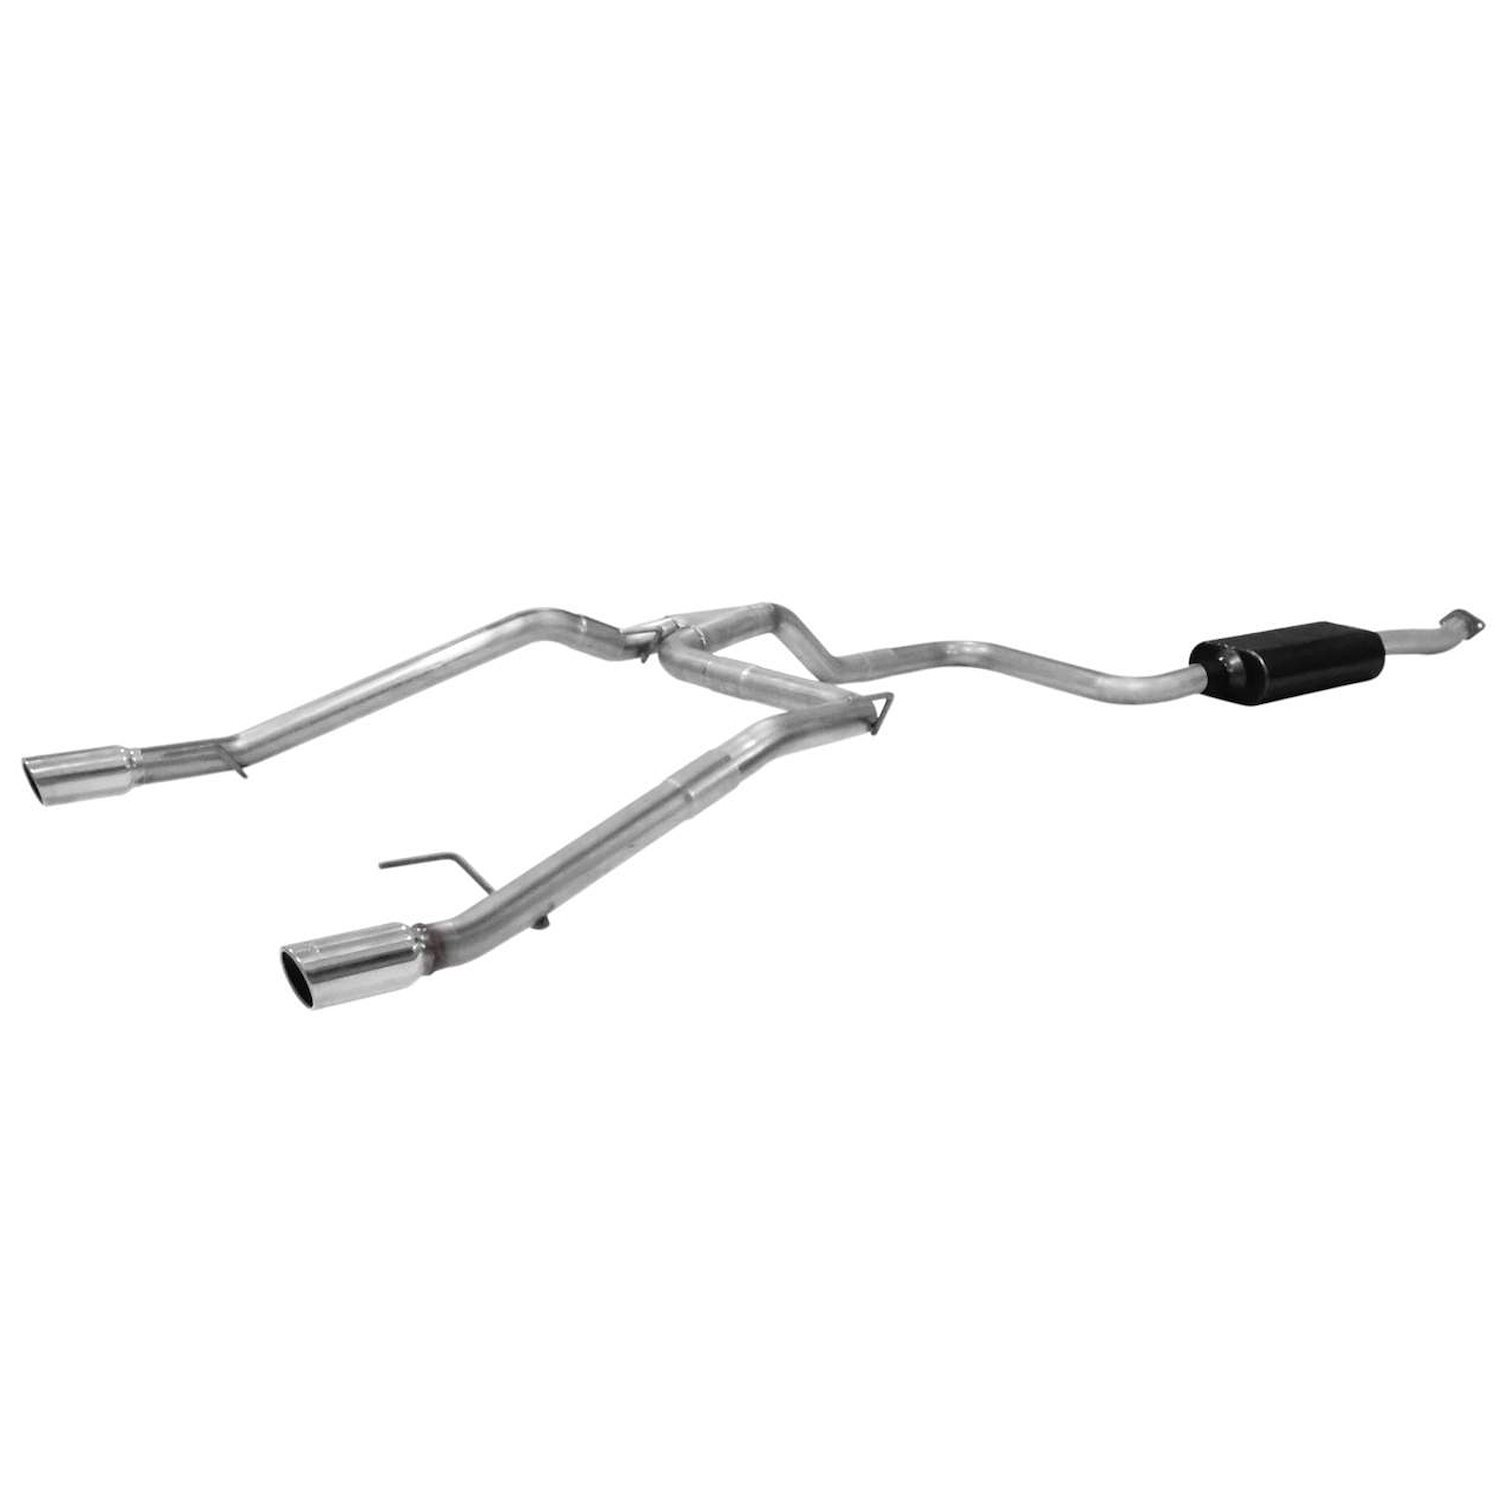 Force II Cat-Back Exhaust System 2011-2016 Chevy Cruze 1.4L/1.8L